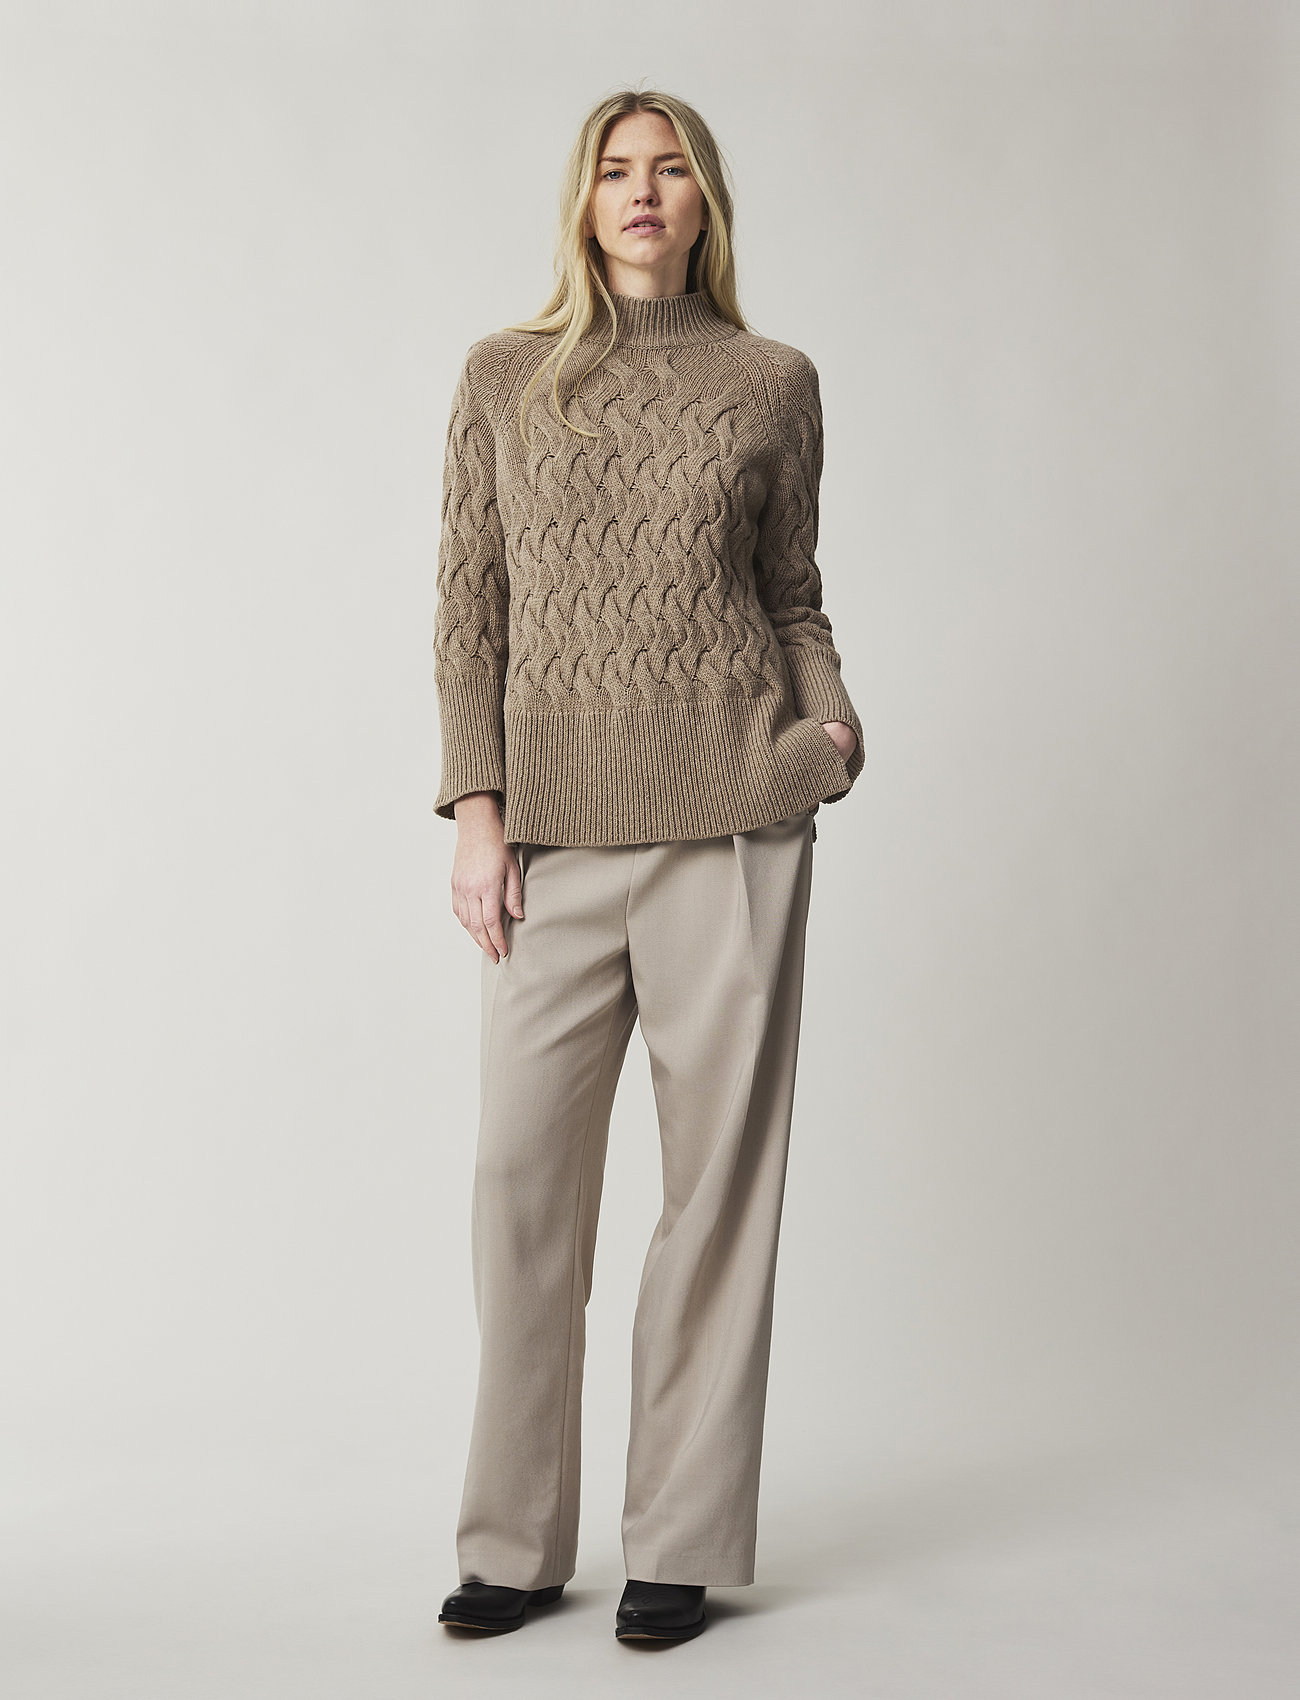 Lexington Clothing - Elisabeth Recycled Wool Mock Neck Sweater - jumpers - light brown - 1